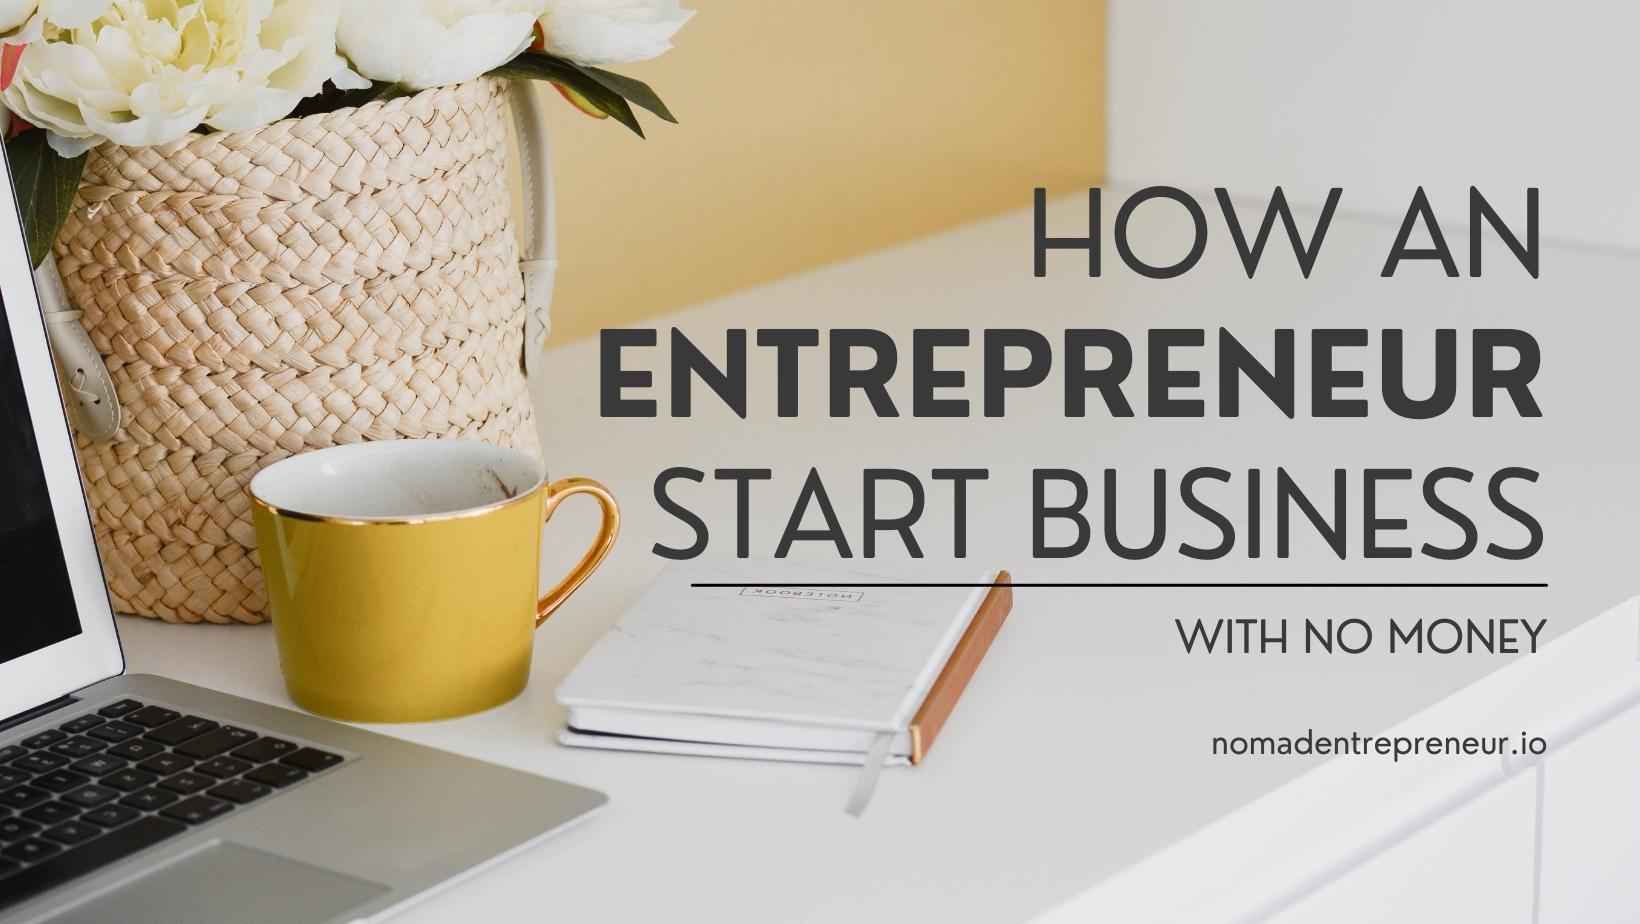 can an entrepreneur start a business without money